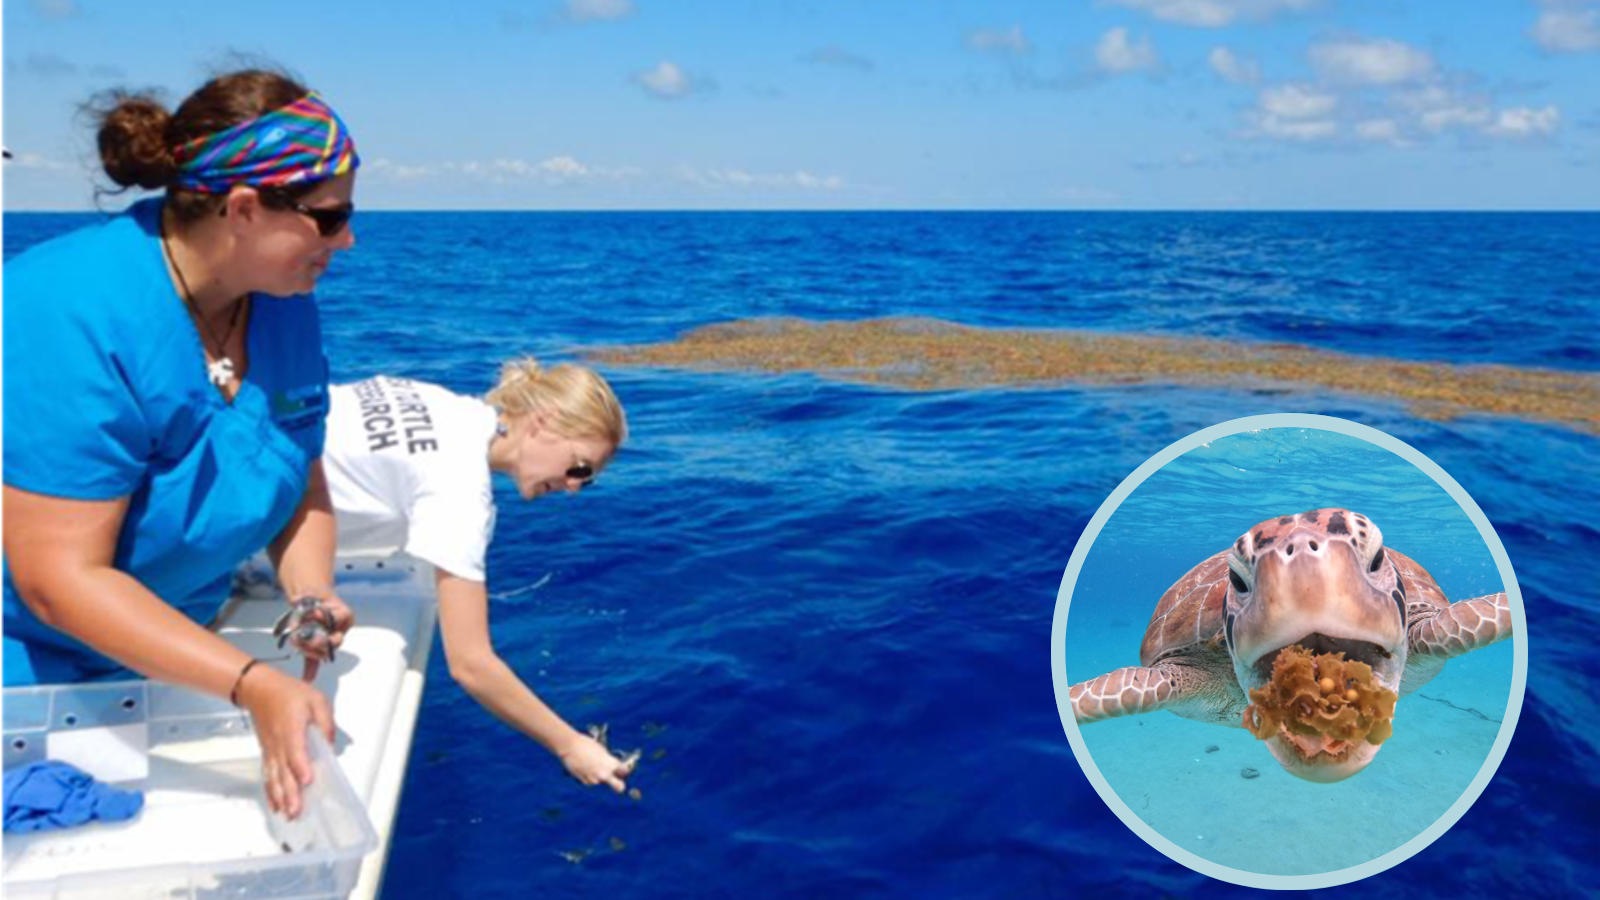 An image of two women releasing sea turtle hatchlings into the blue ocean with seaweed in the background. In the bottom right corner there is an image of a sea turtle eating seaweed in the ocean.